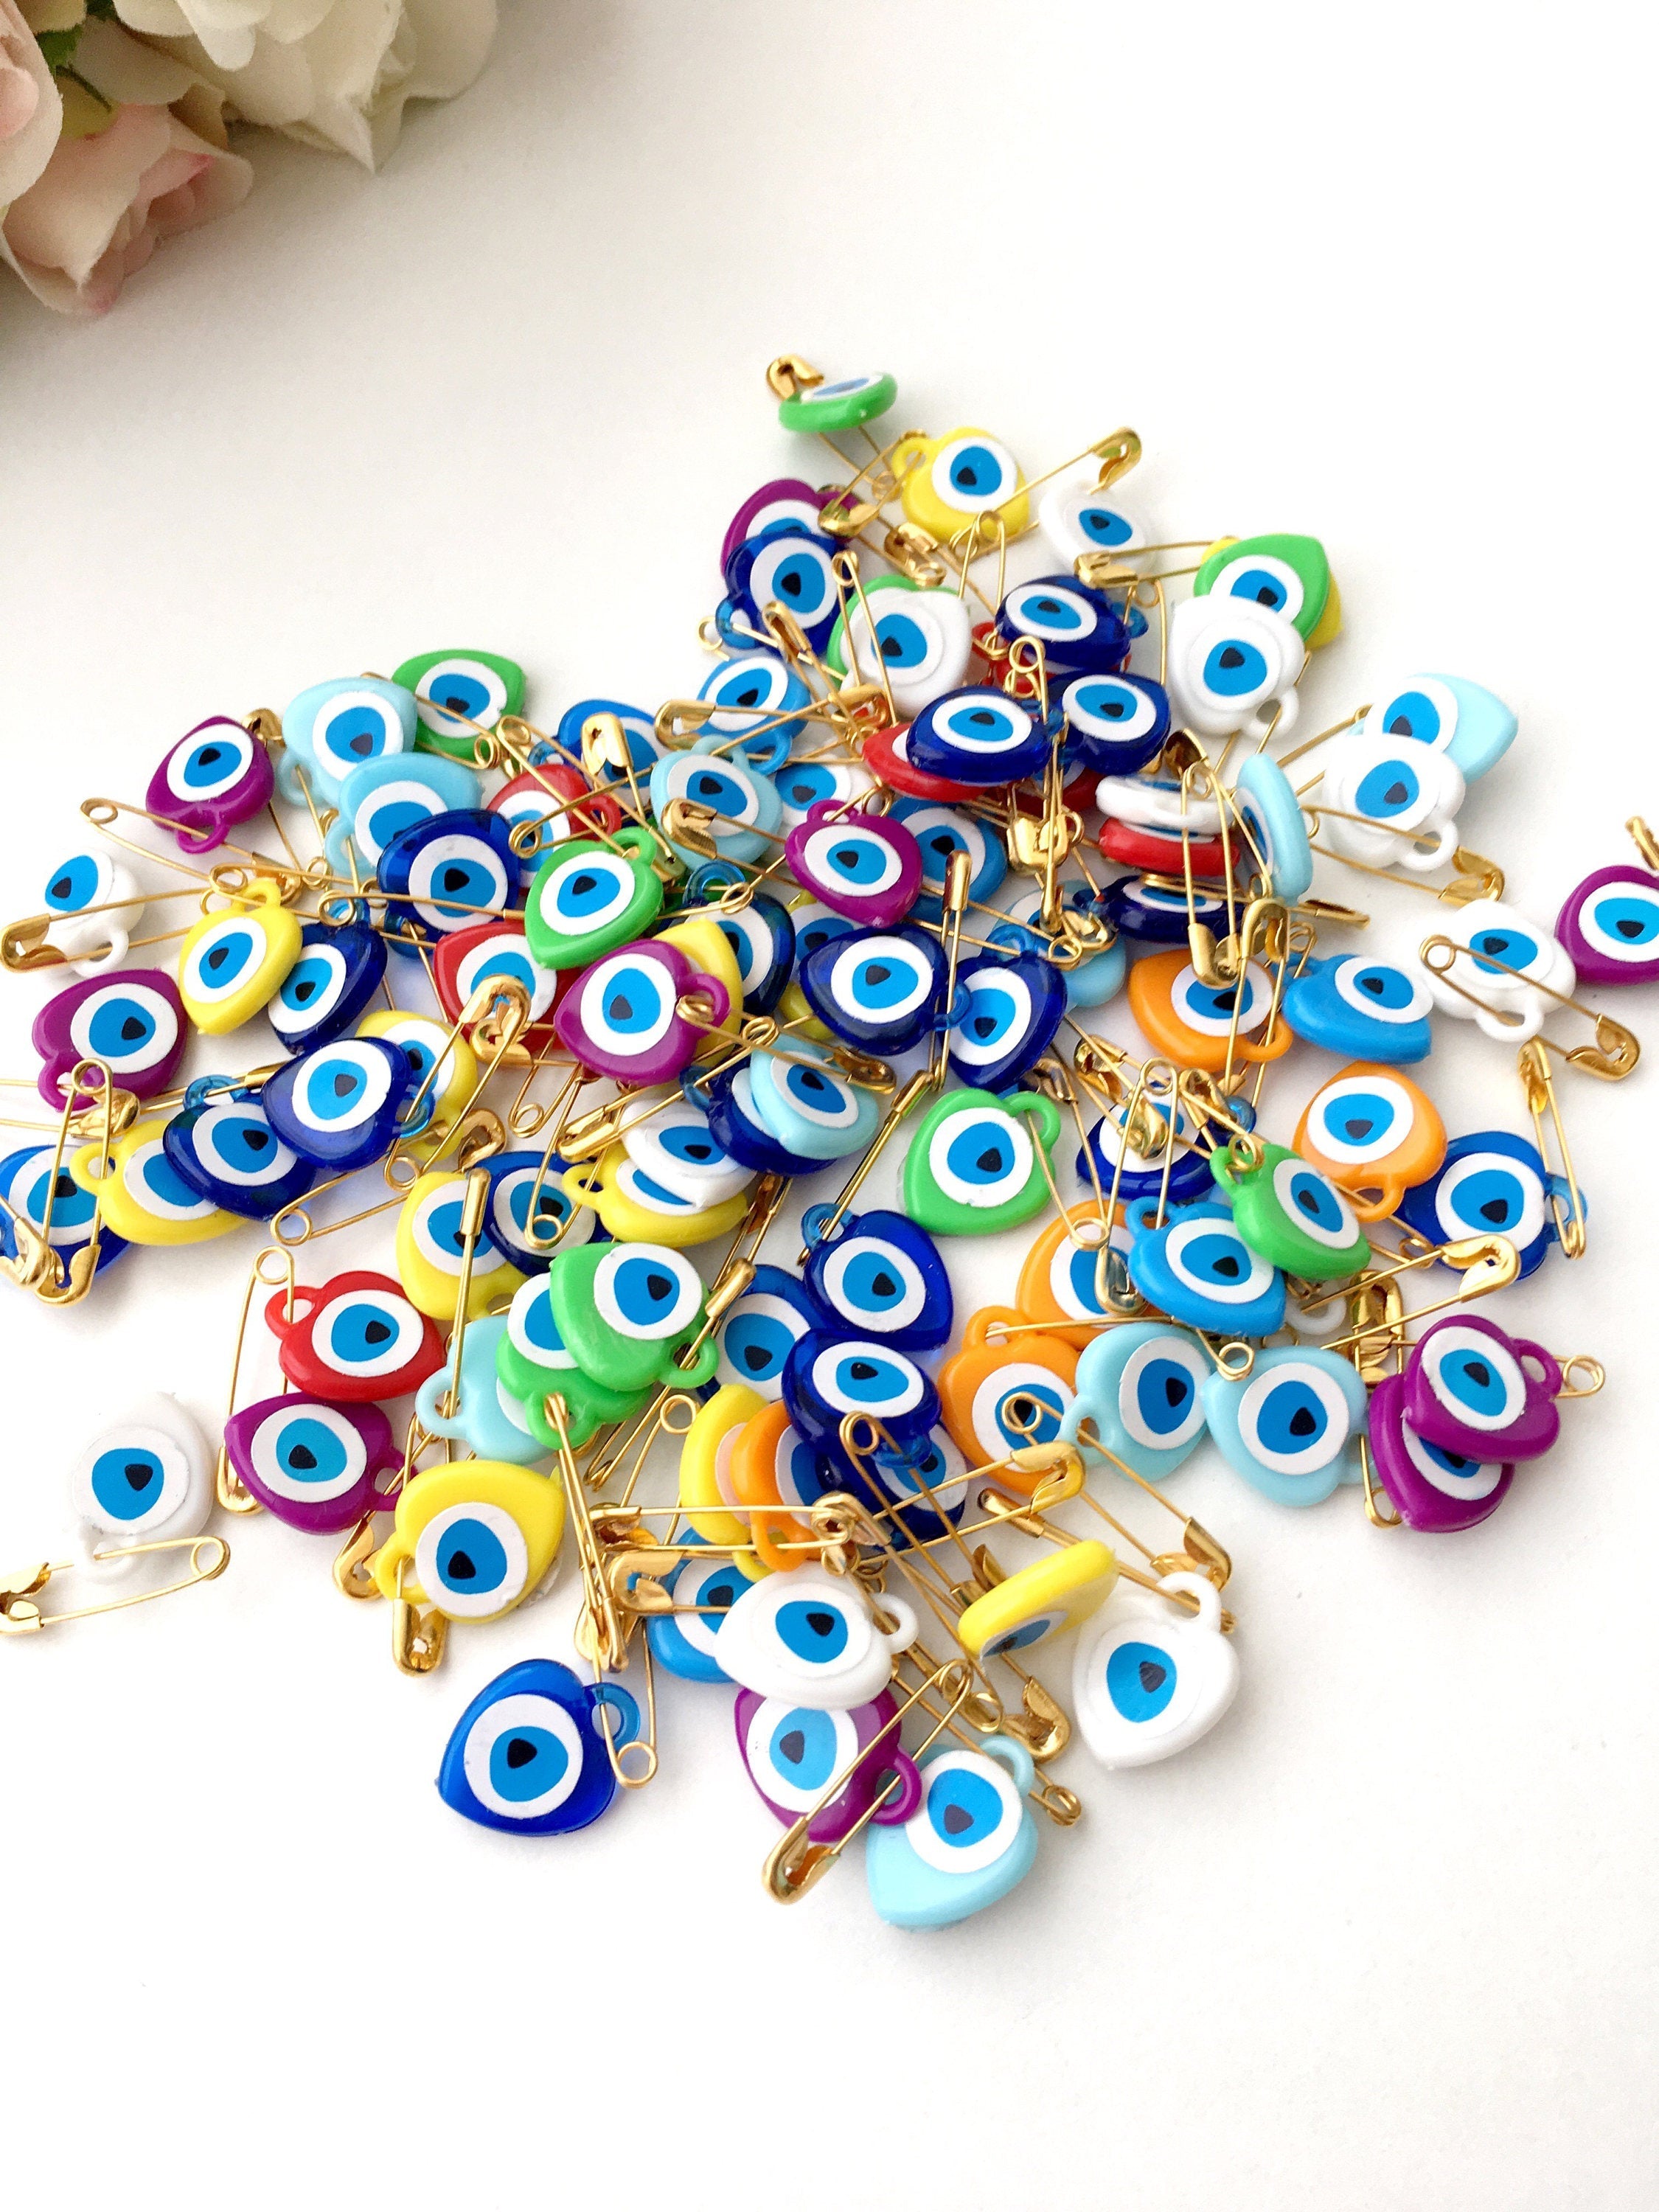 100 Mixed Resin Evil Eye Safety Pins for Unique Wedding Favors and Gifts - Nazar Boncuk Beads Included Bijou Her